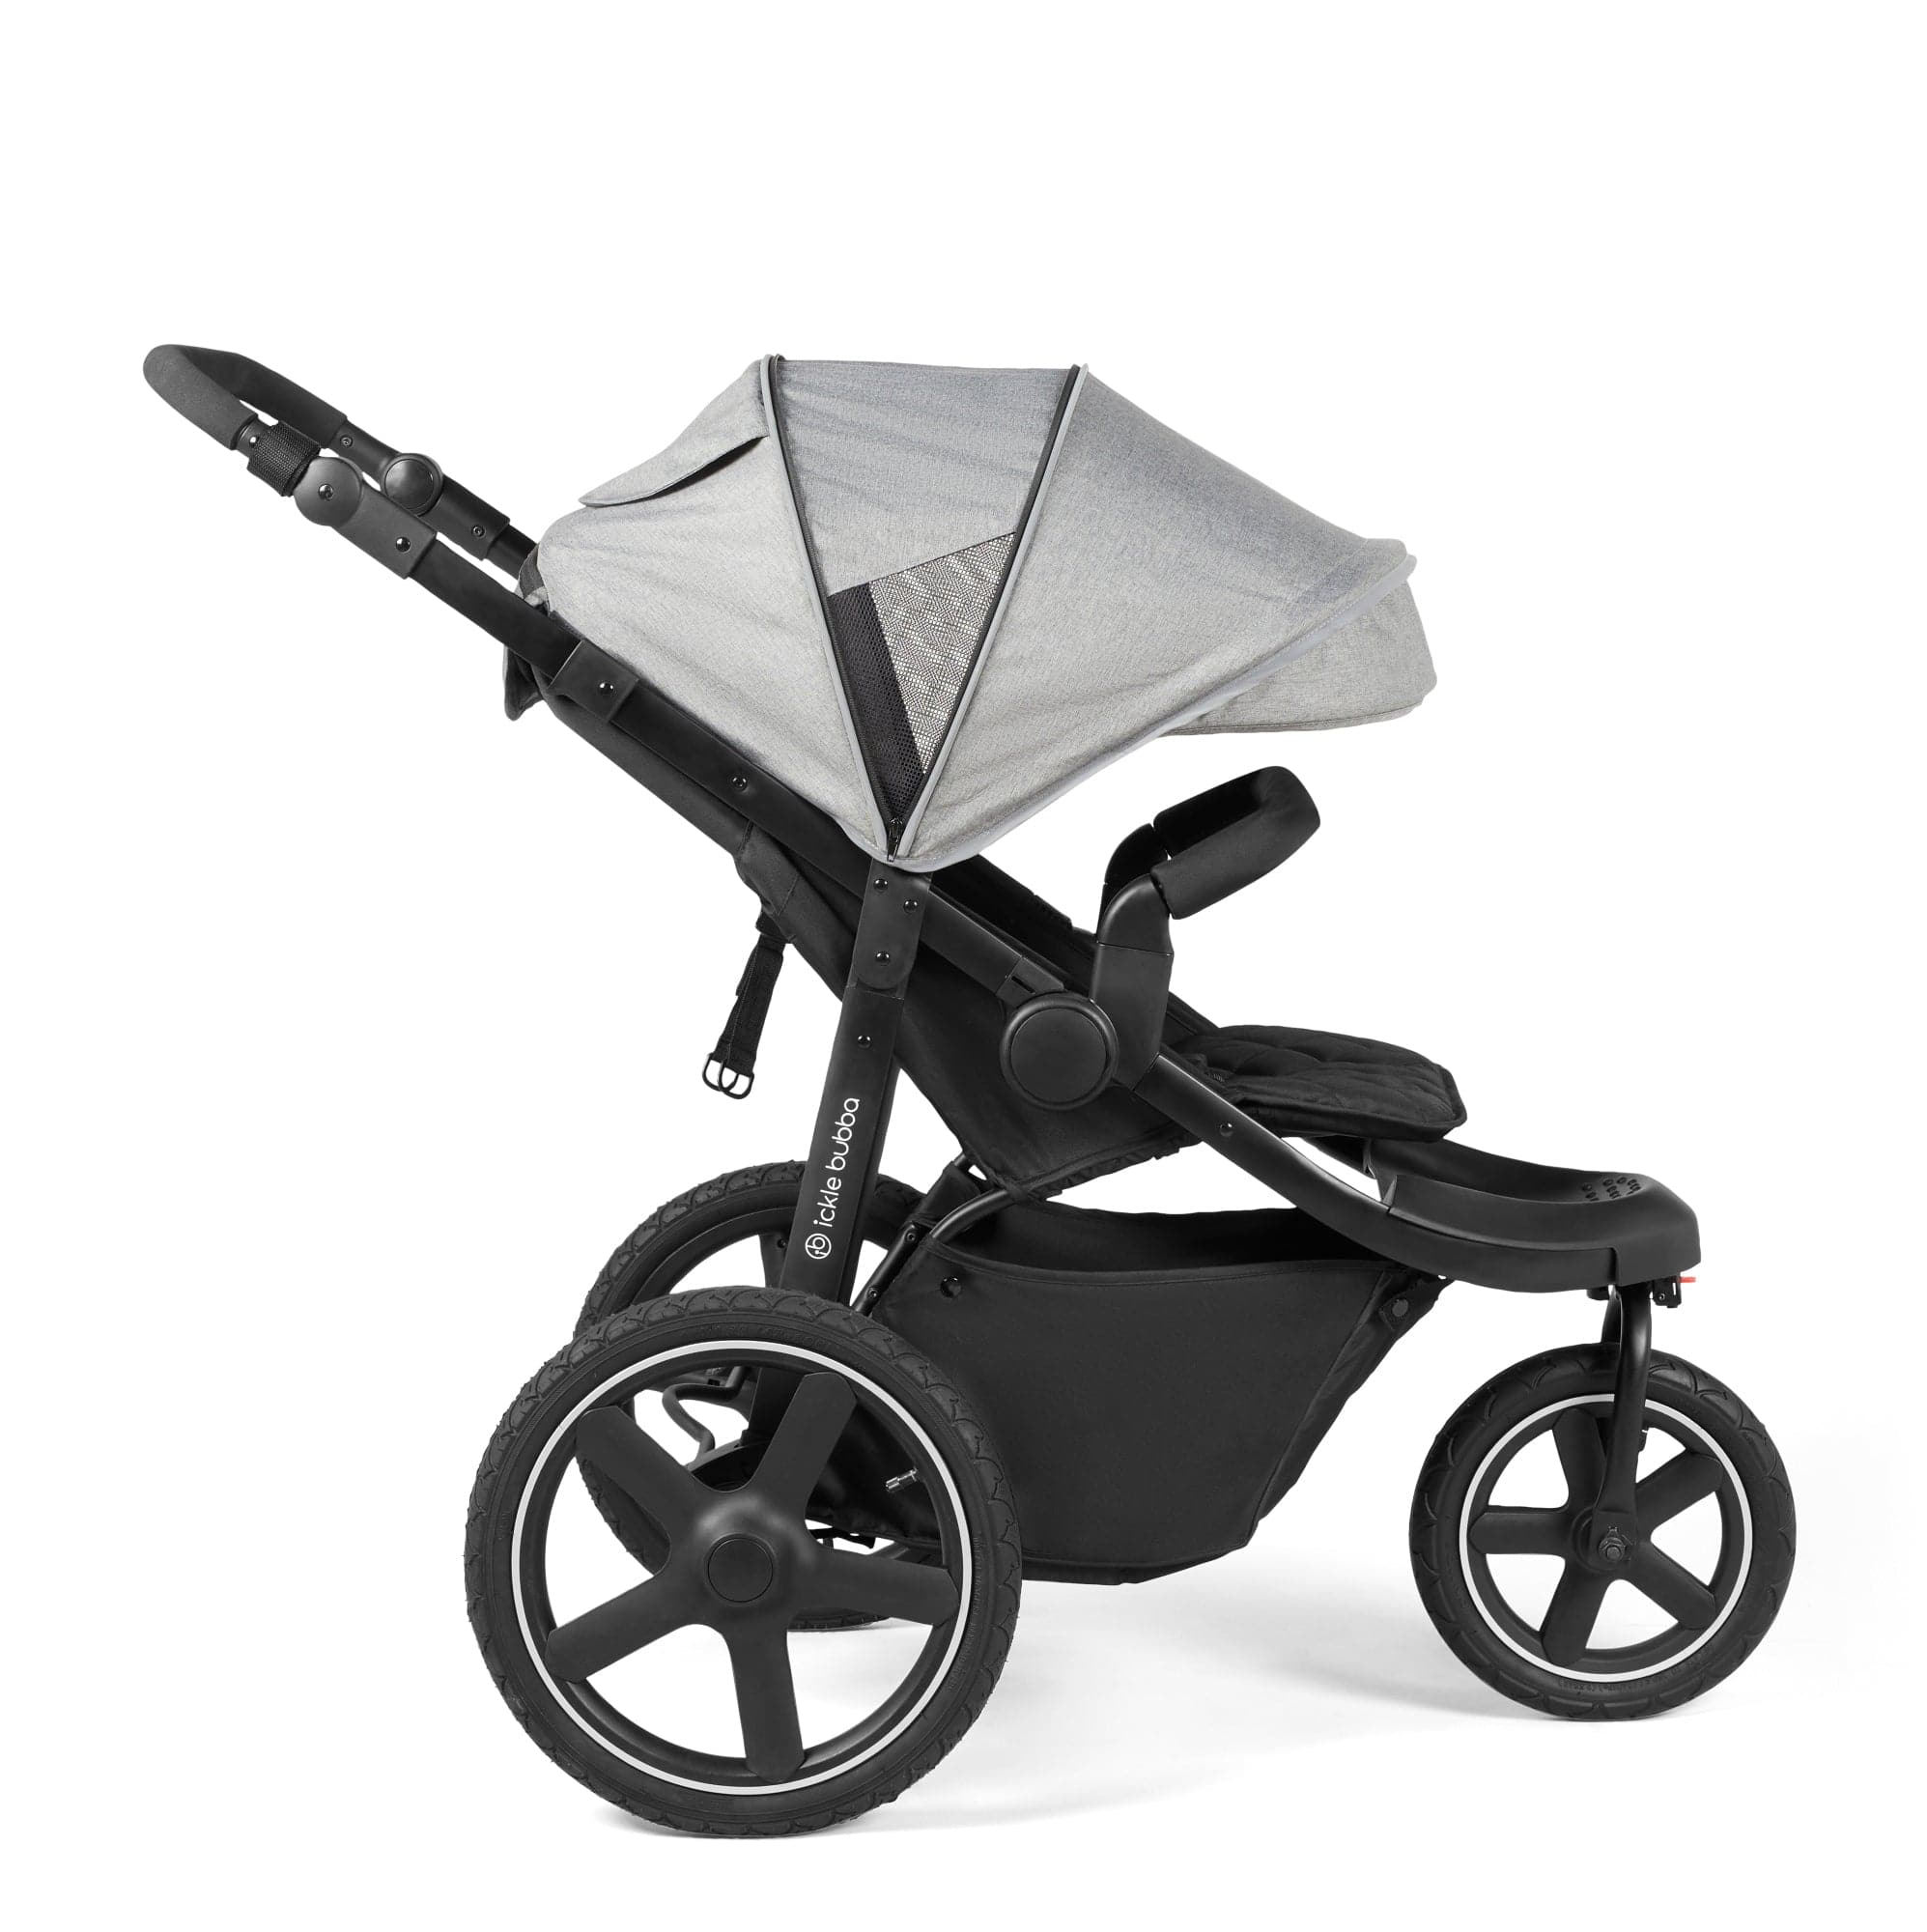 Ickle Bubba 3 wheel pushchairs Ickle Bubba Venus Prime Jogger Stroller I-Size Travel System - Black/Space Grey with Base 13-004-600-014